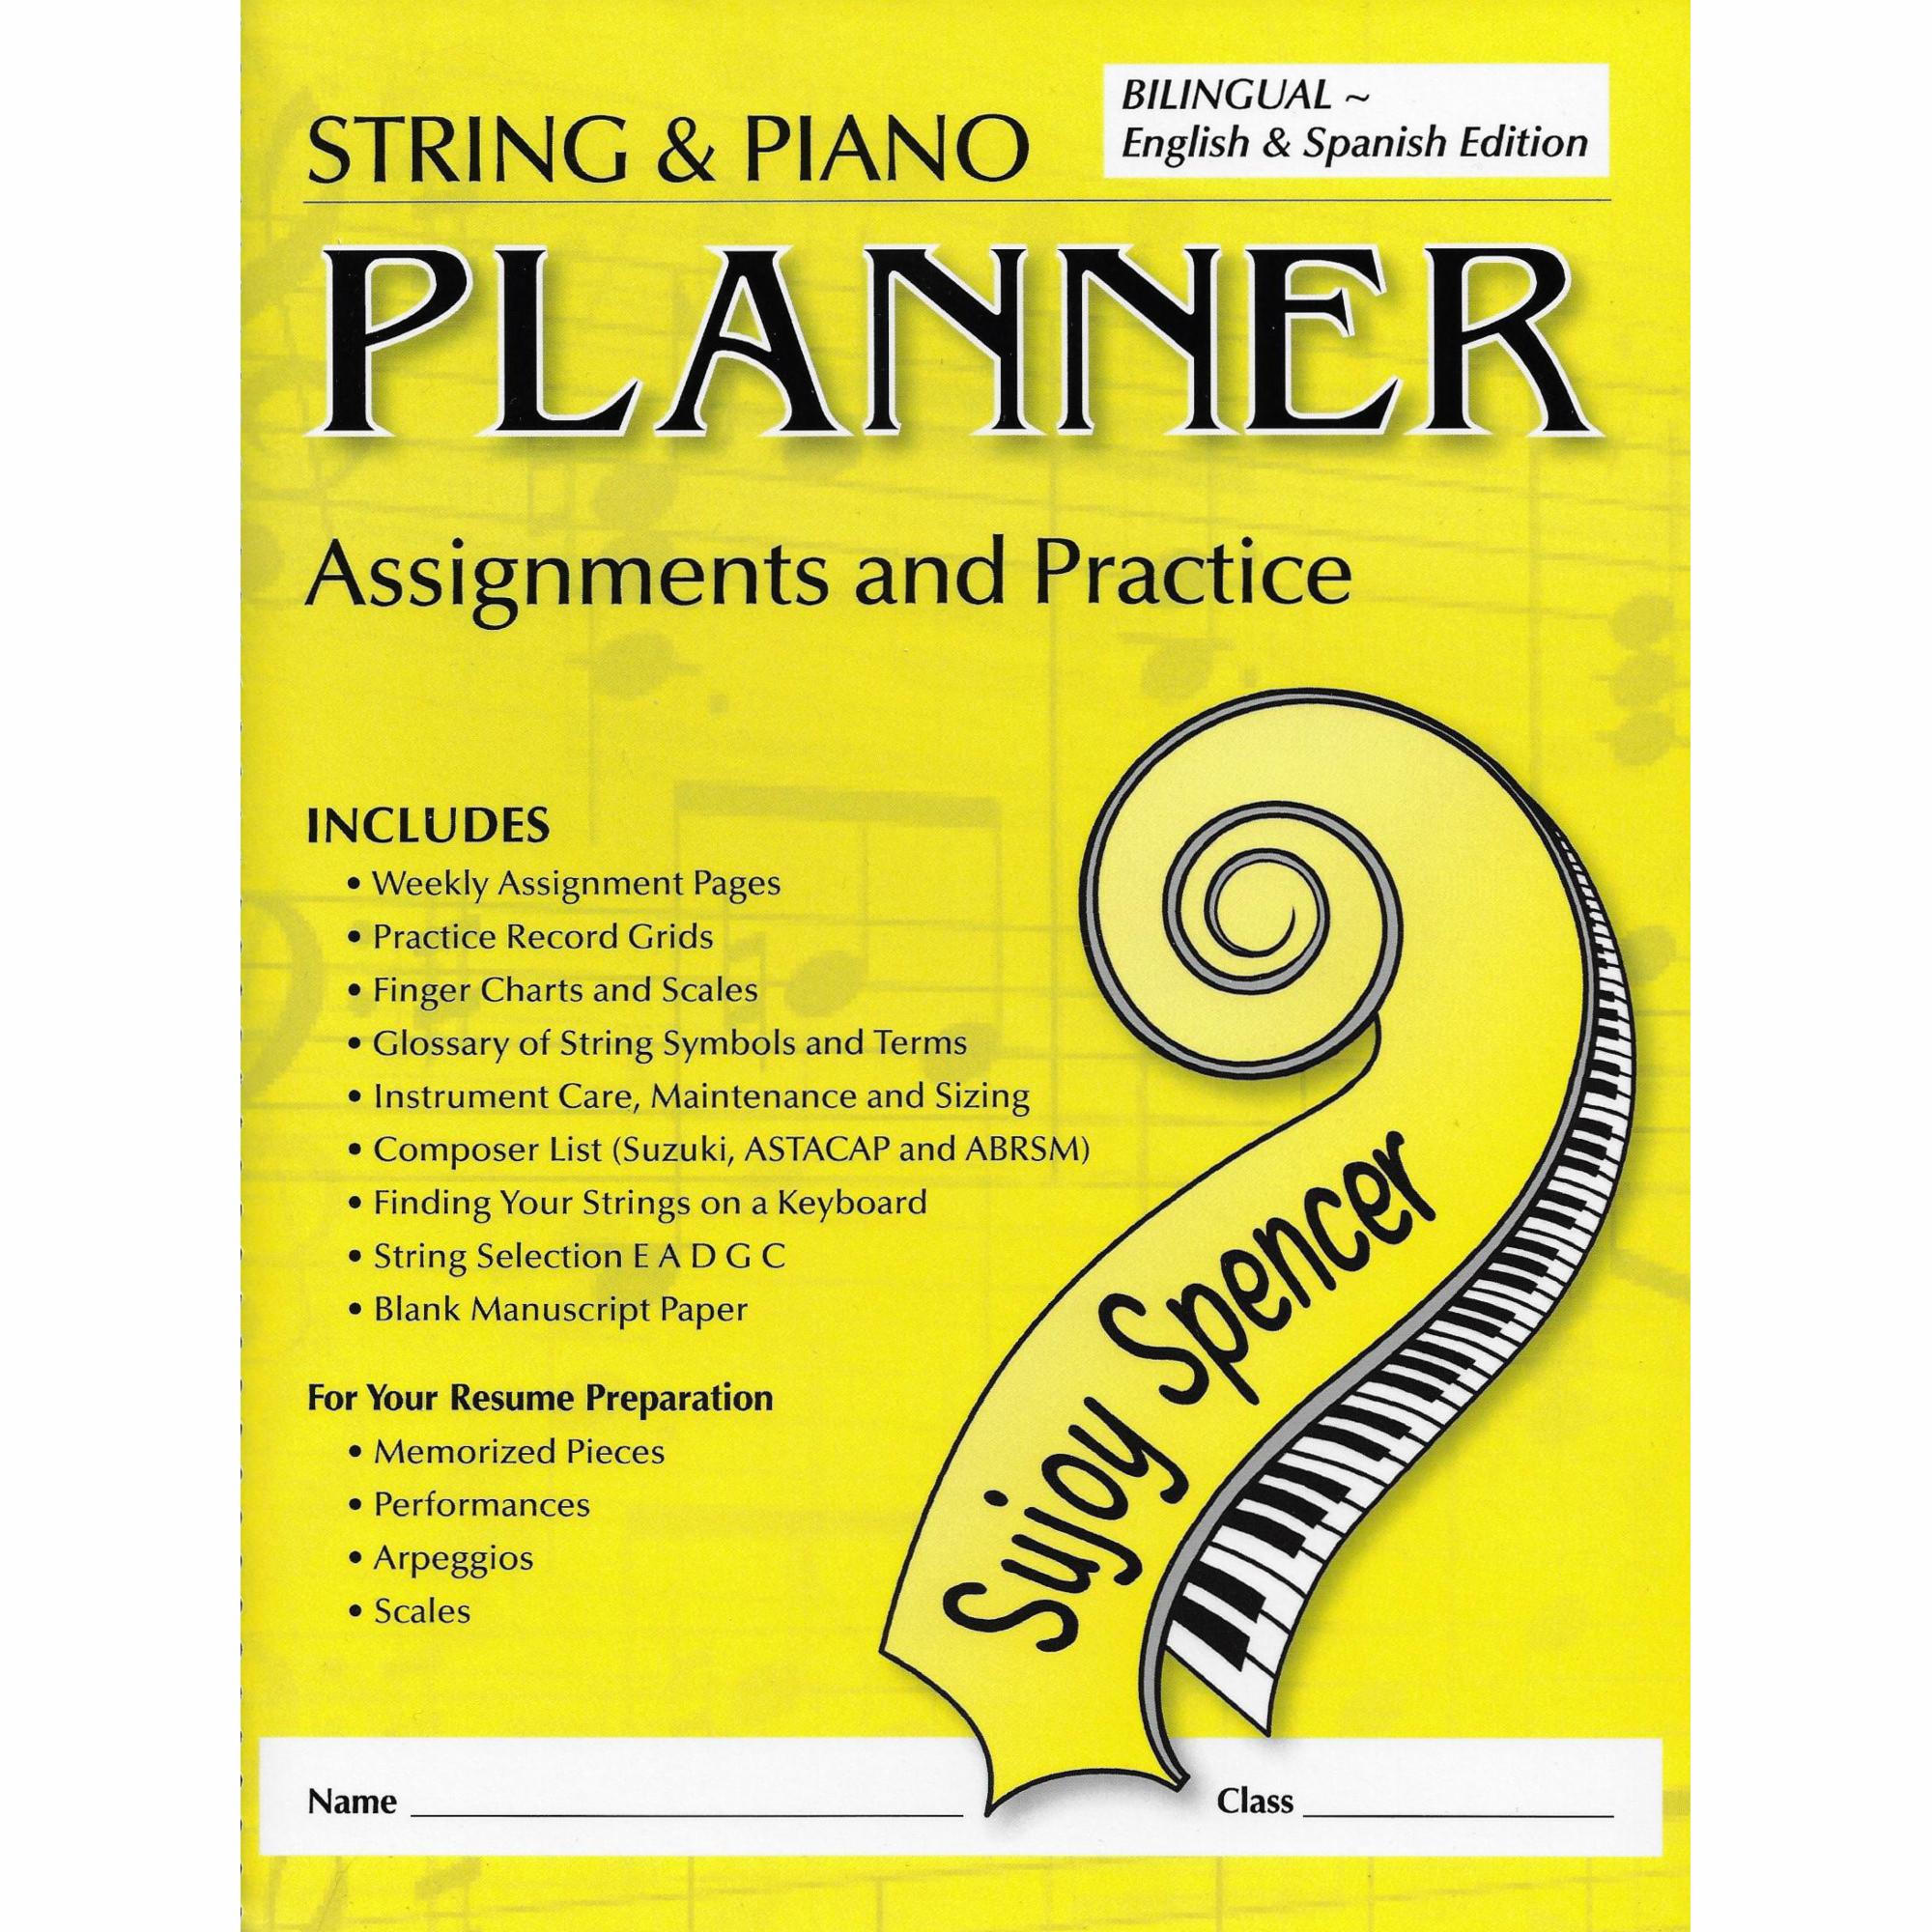 String & Piano Planner: Assignments and Practice